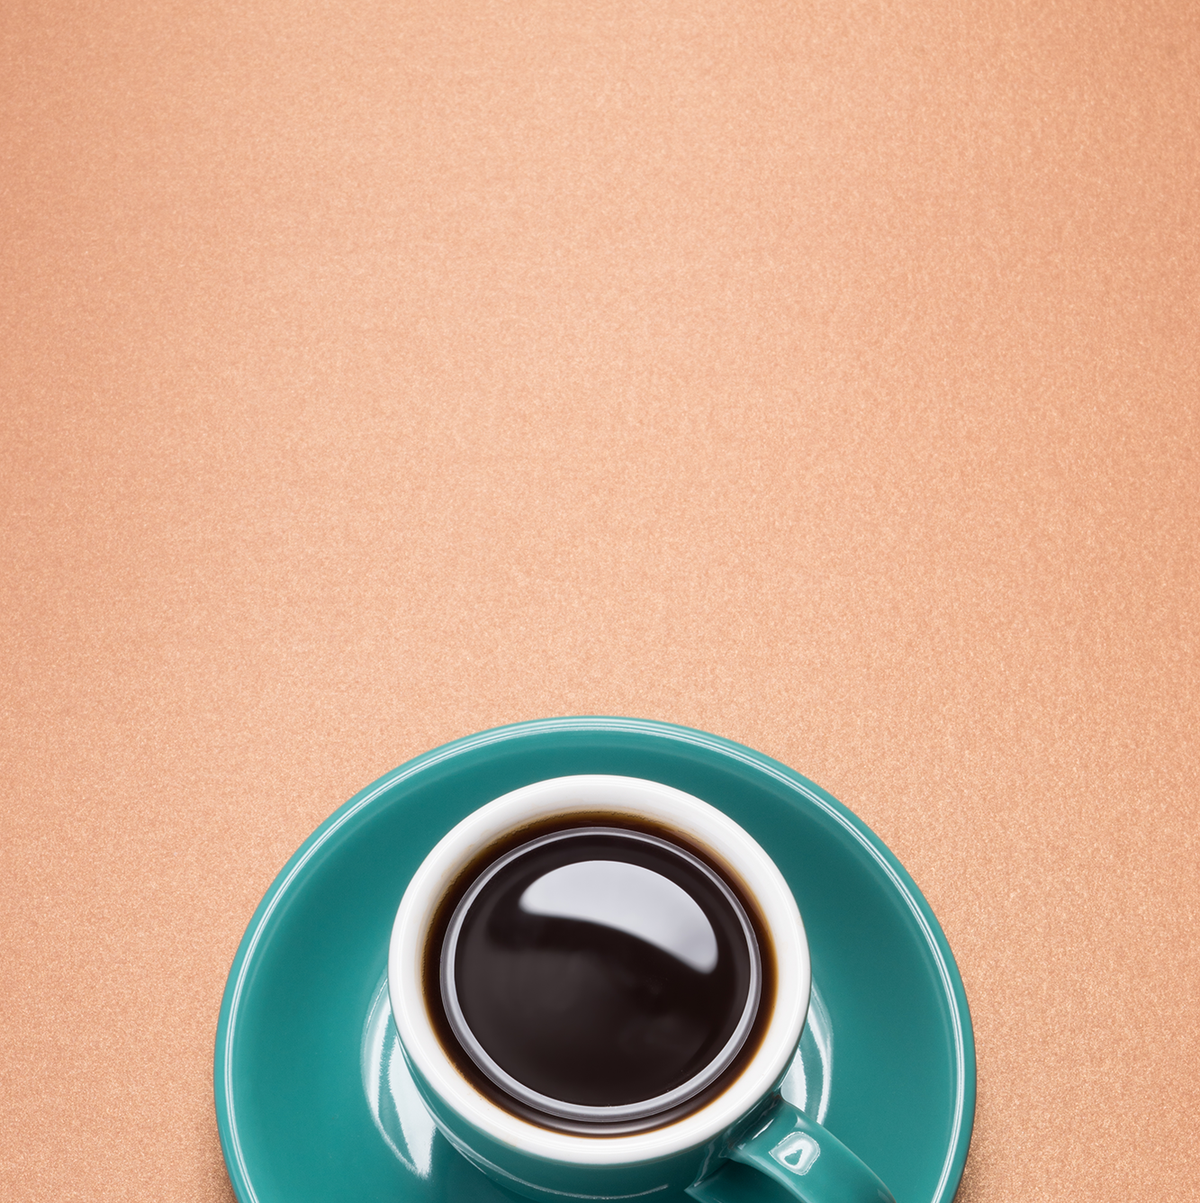 https://hips.hearstapps.com/hmg-prod/images/how-to-make-espresso-1617301390.png?crop=1.00xw:0.668xh;0,0.280xh&resize=1200:*